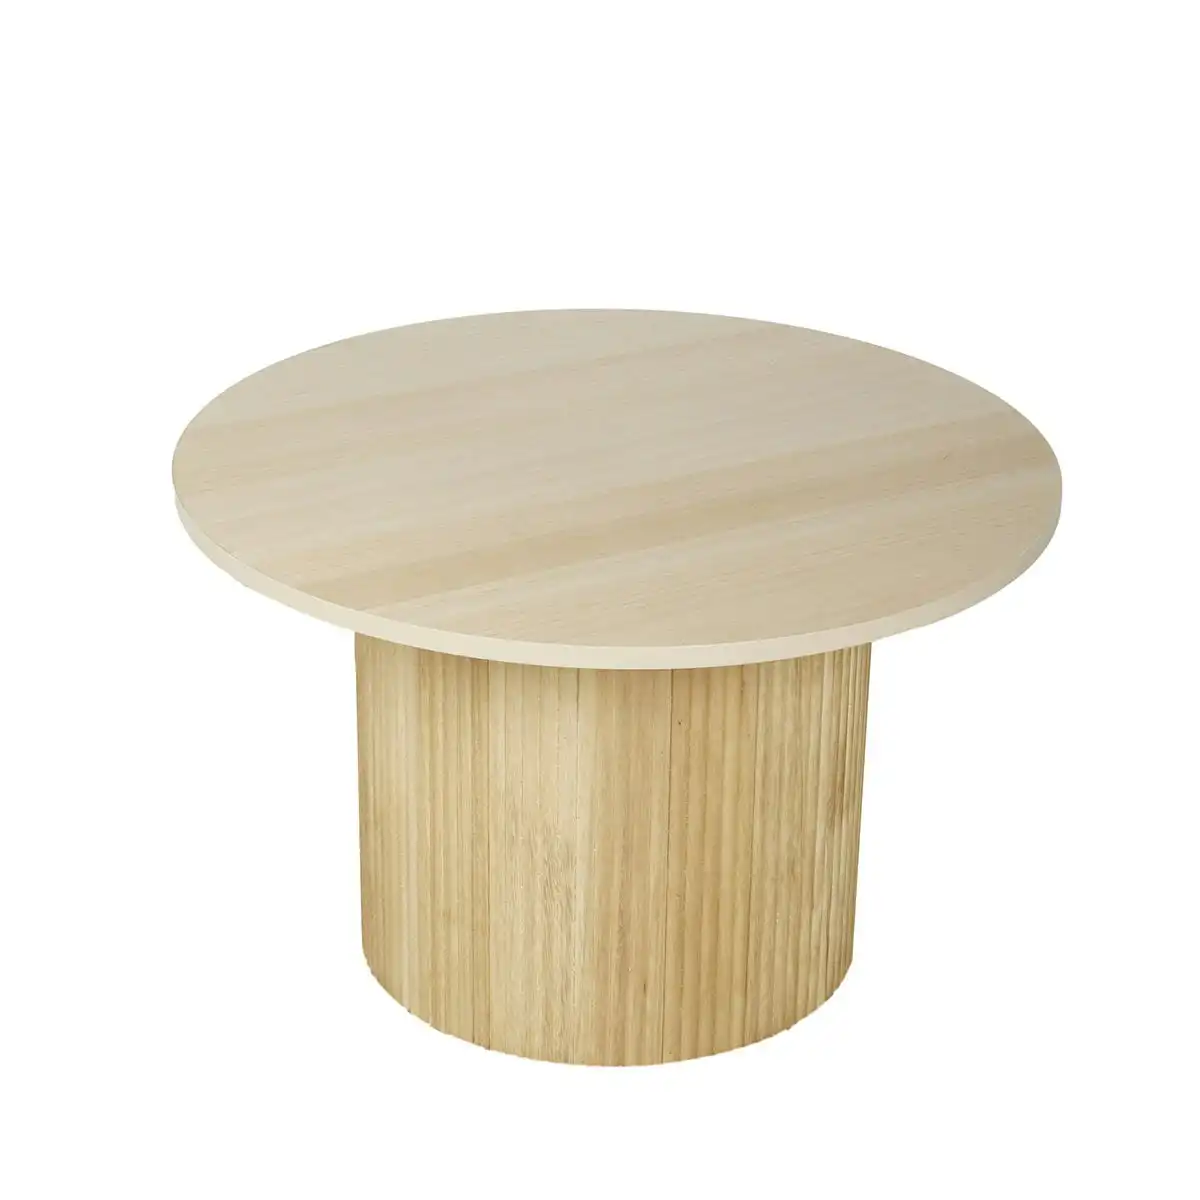 65cm Aimee Fluted Round Coffee Table Natural